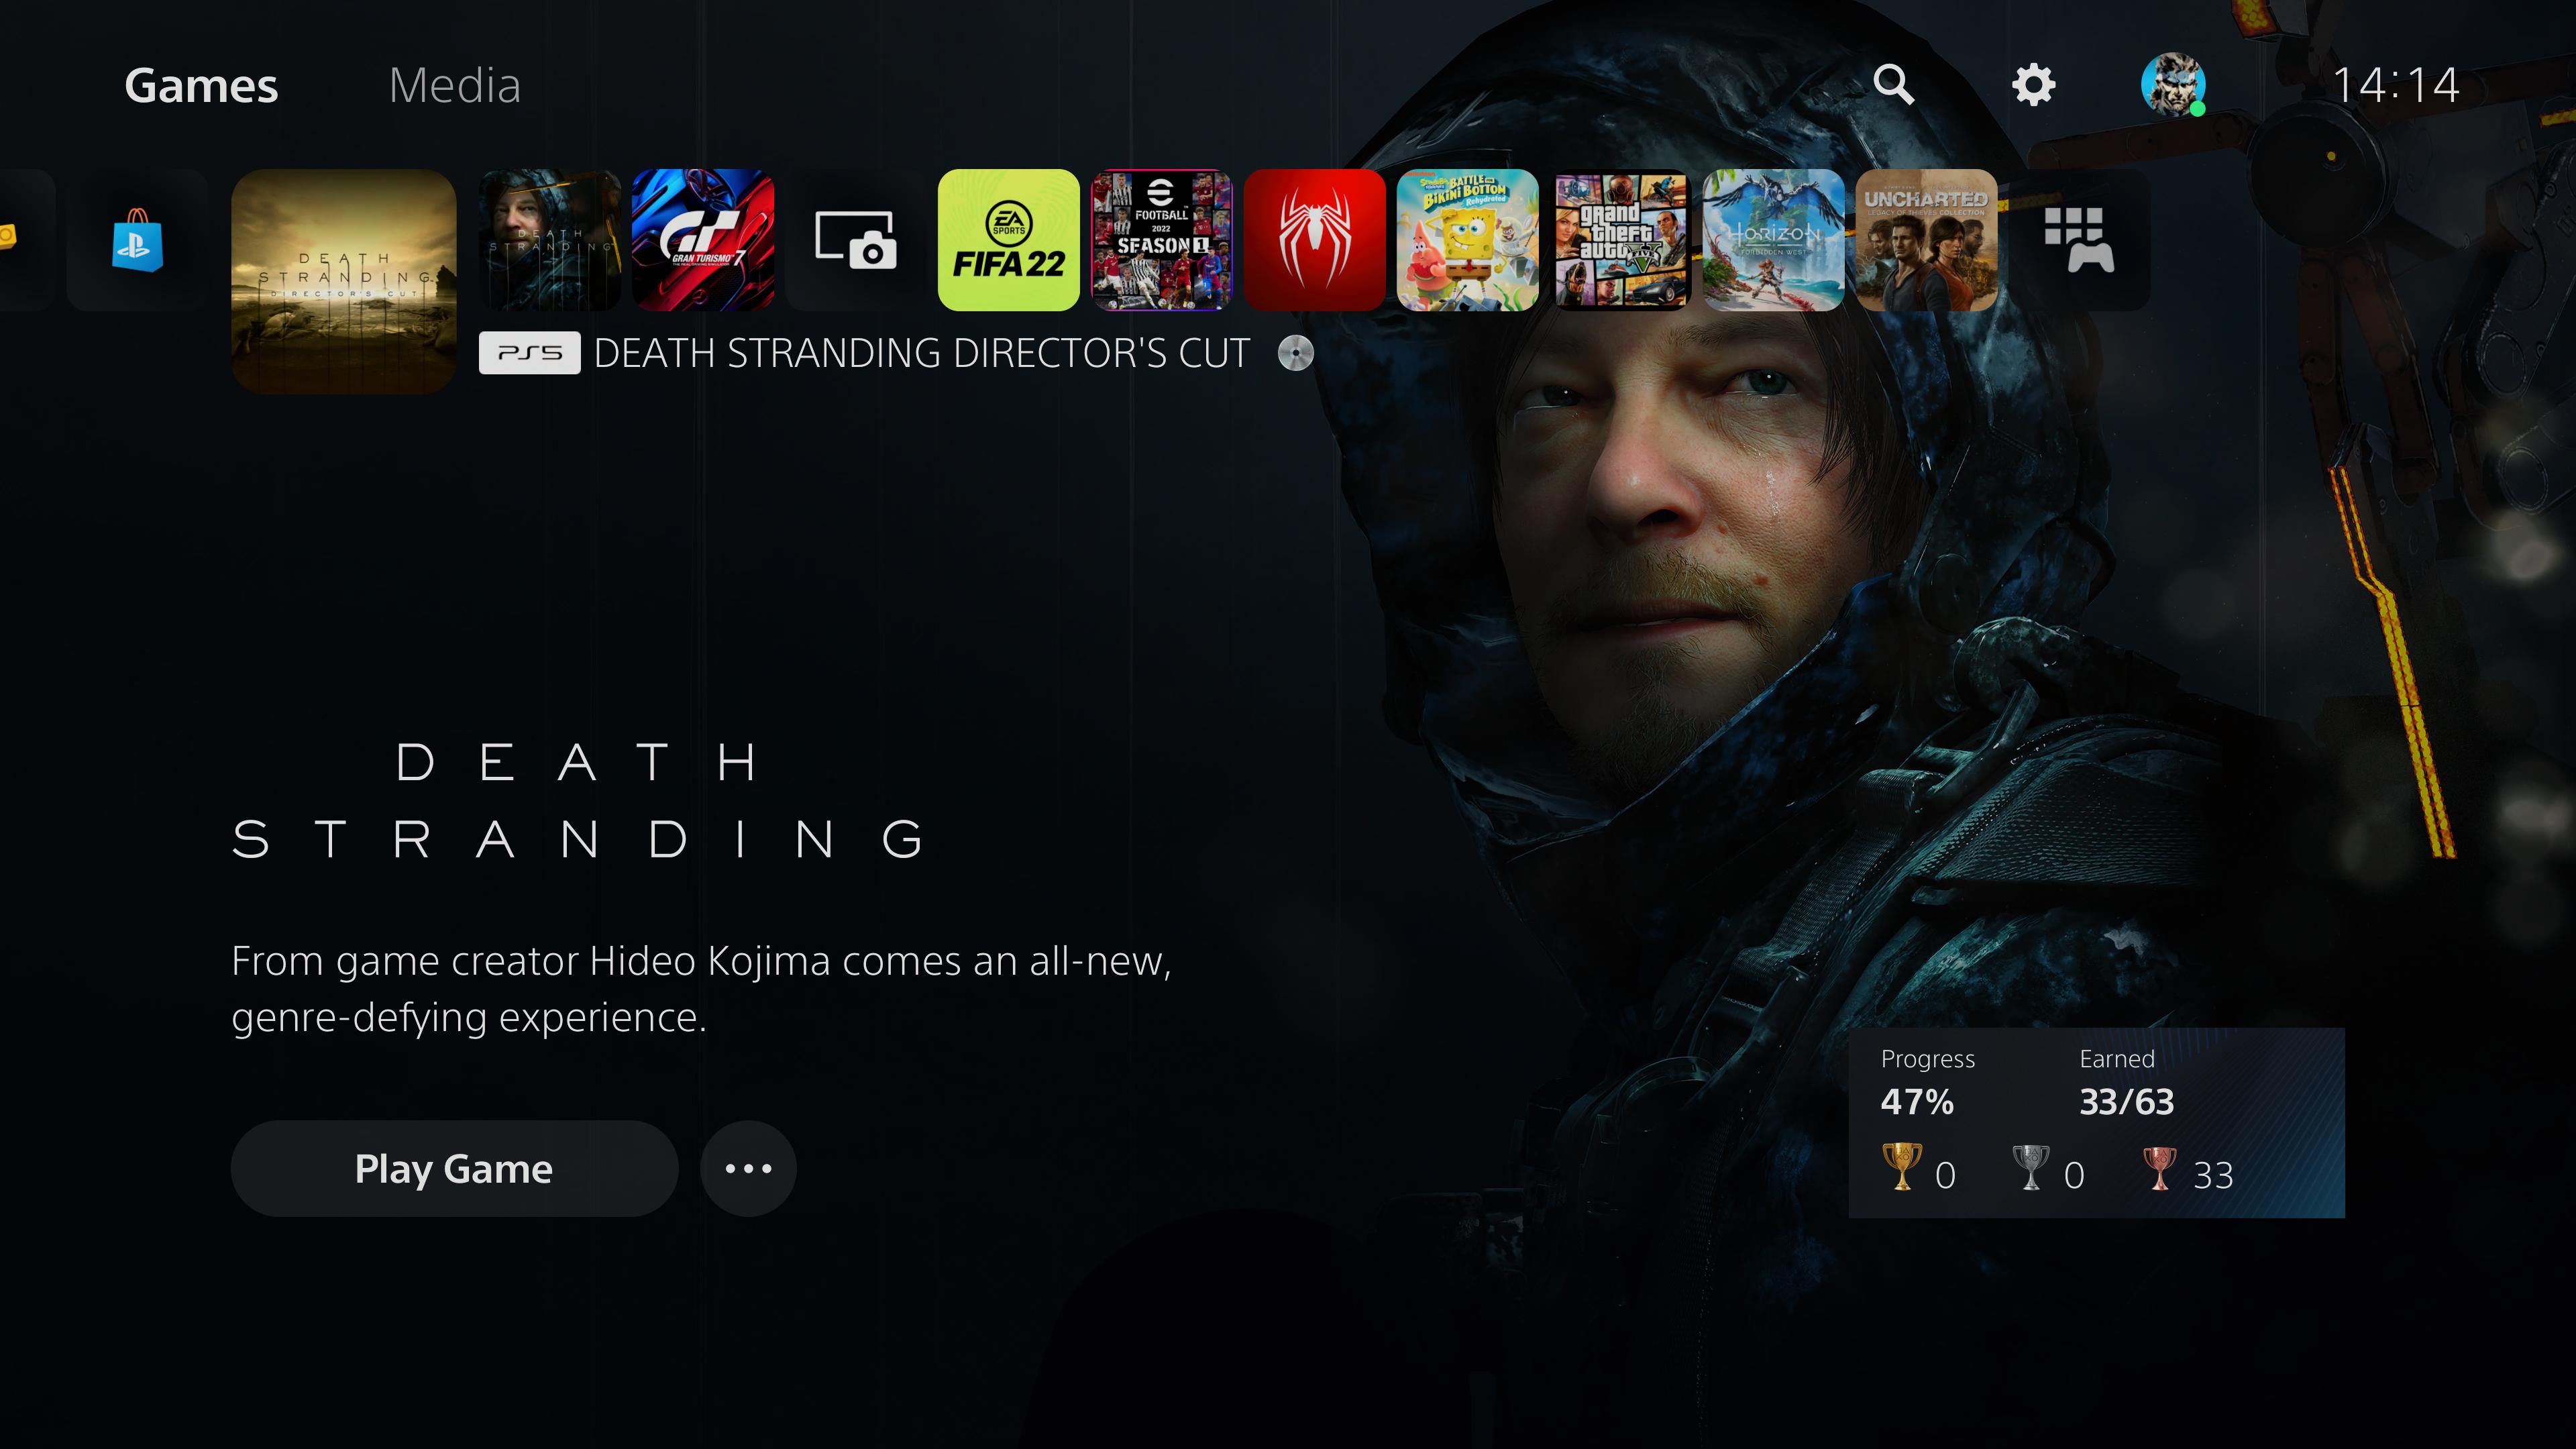 PS5 home screen showing Death Stranding on PS5 and PS4